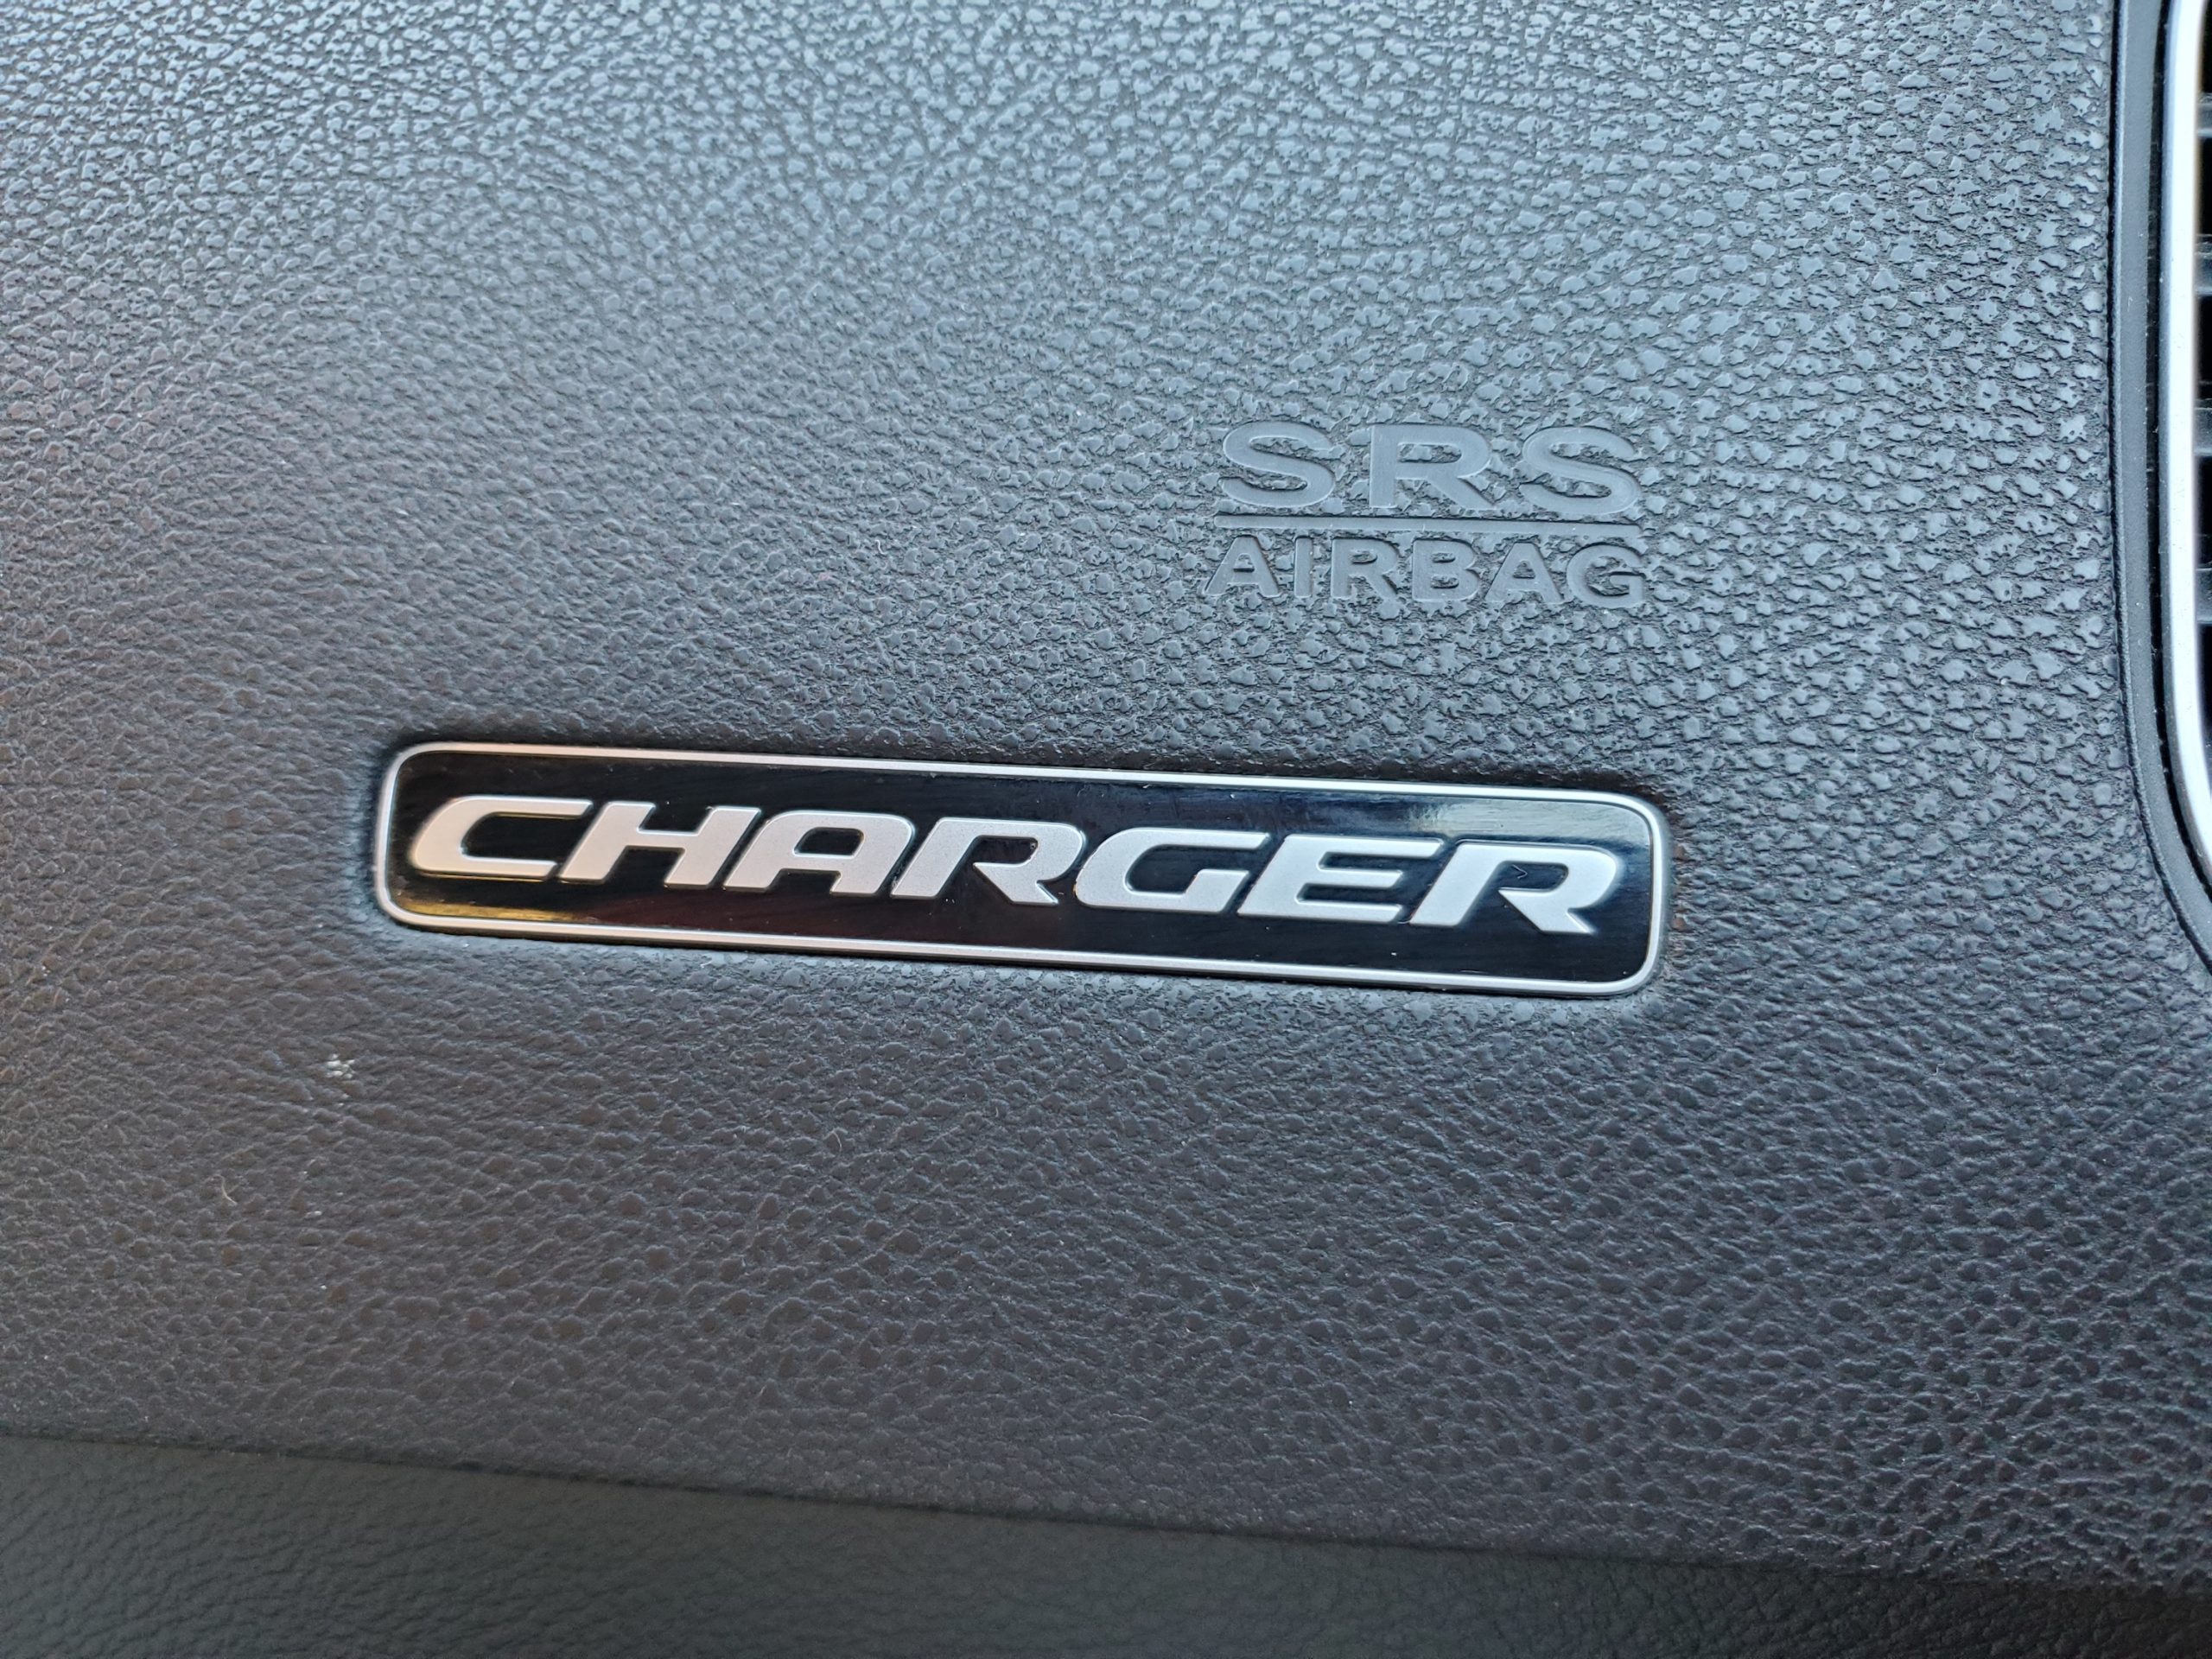 Close-up of the Dodge Charger logo on a car dashboard